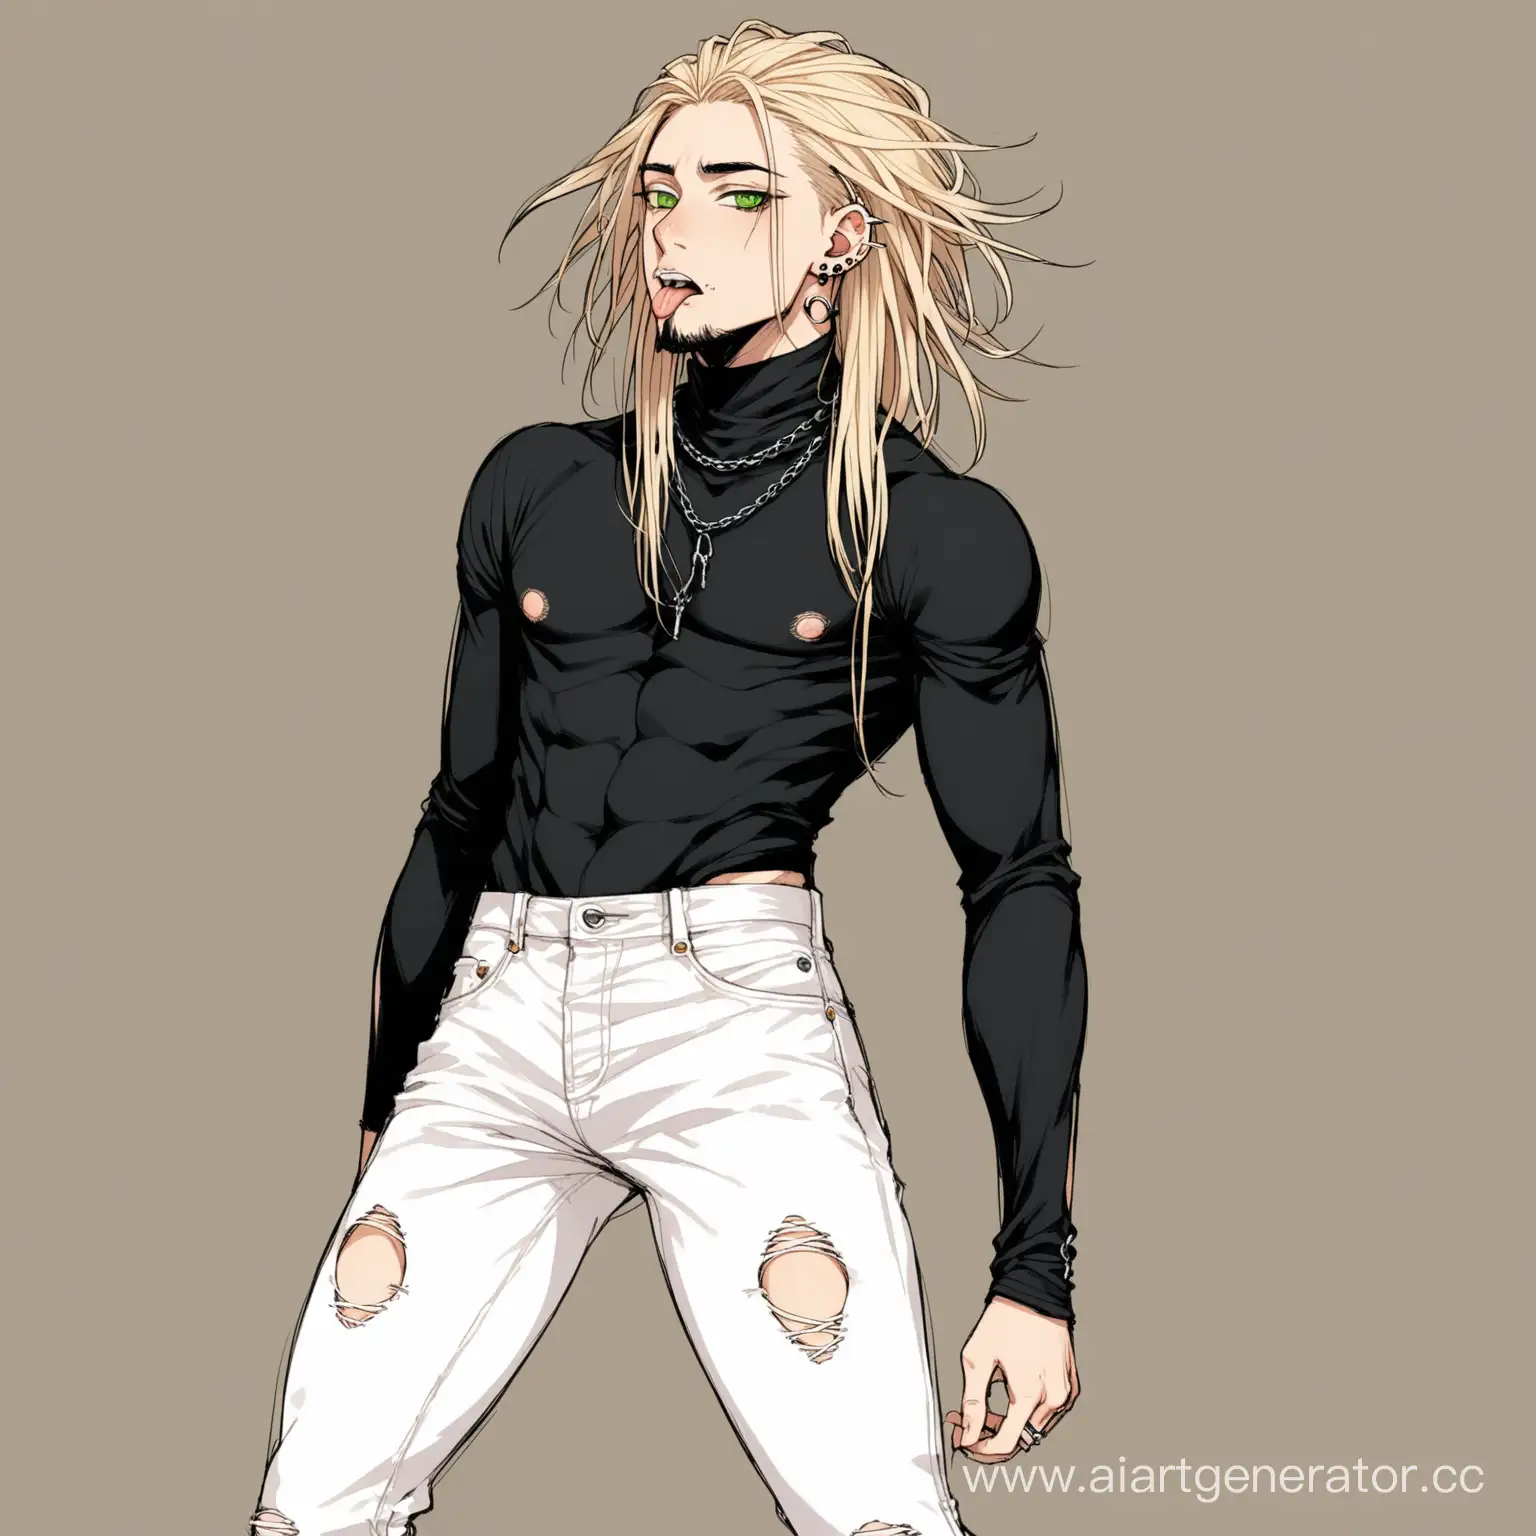 Man-with-Very-Light-Blonde-Dreadlocks-and-Piercings-in-Black-Shirt-and-White-Jeans